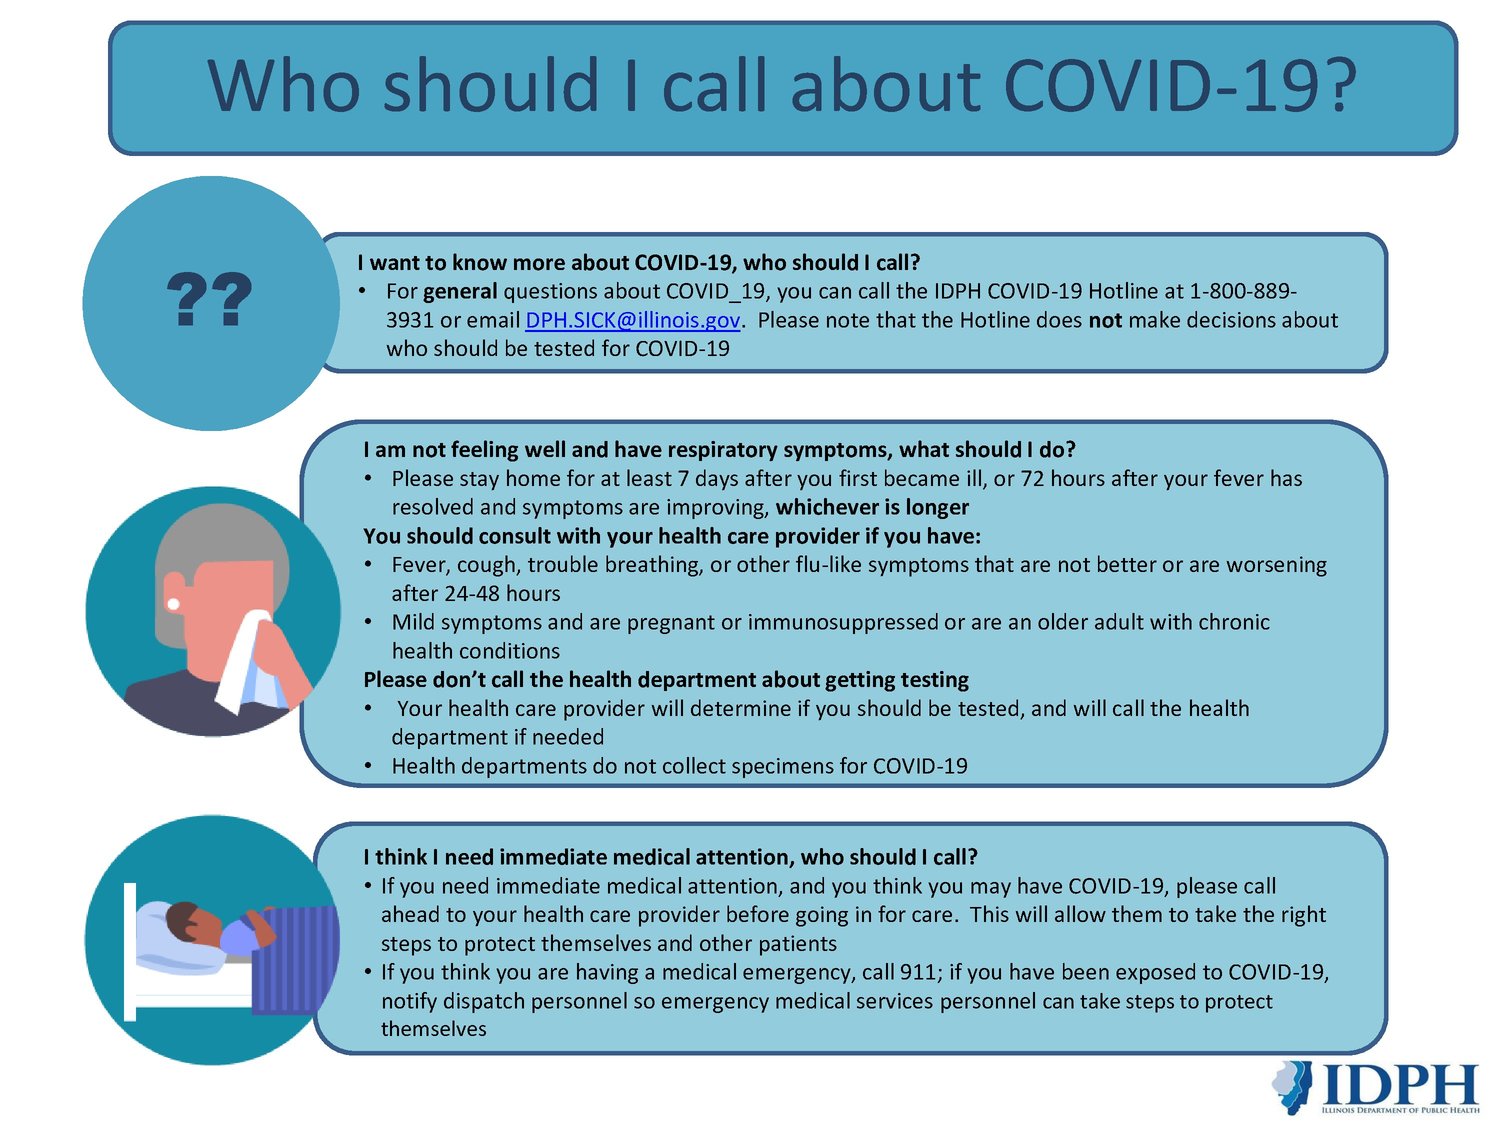 Midwest Medical Center Plans To Answer Your Covid-19 Questions 24 Hours A Day Jo Daviess County Health Department Now Has Special Covid-19 Email Address Galena Gazette